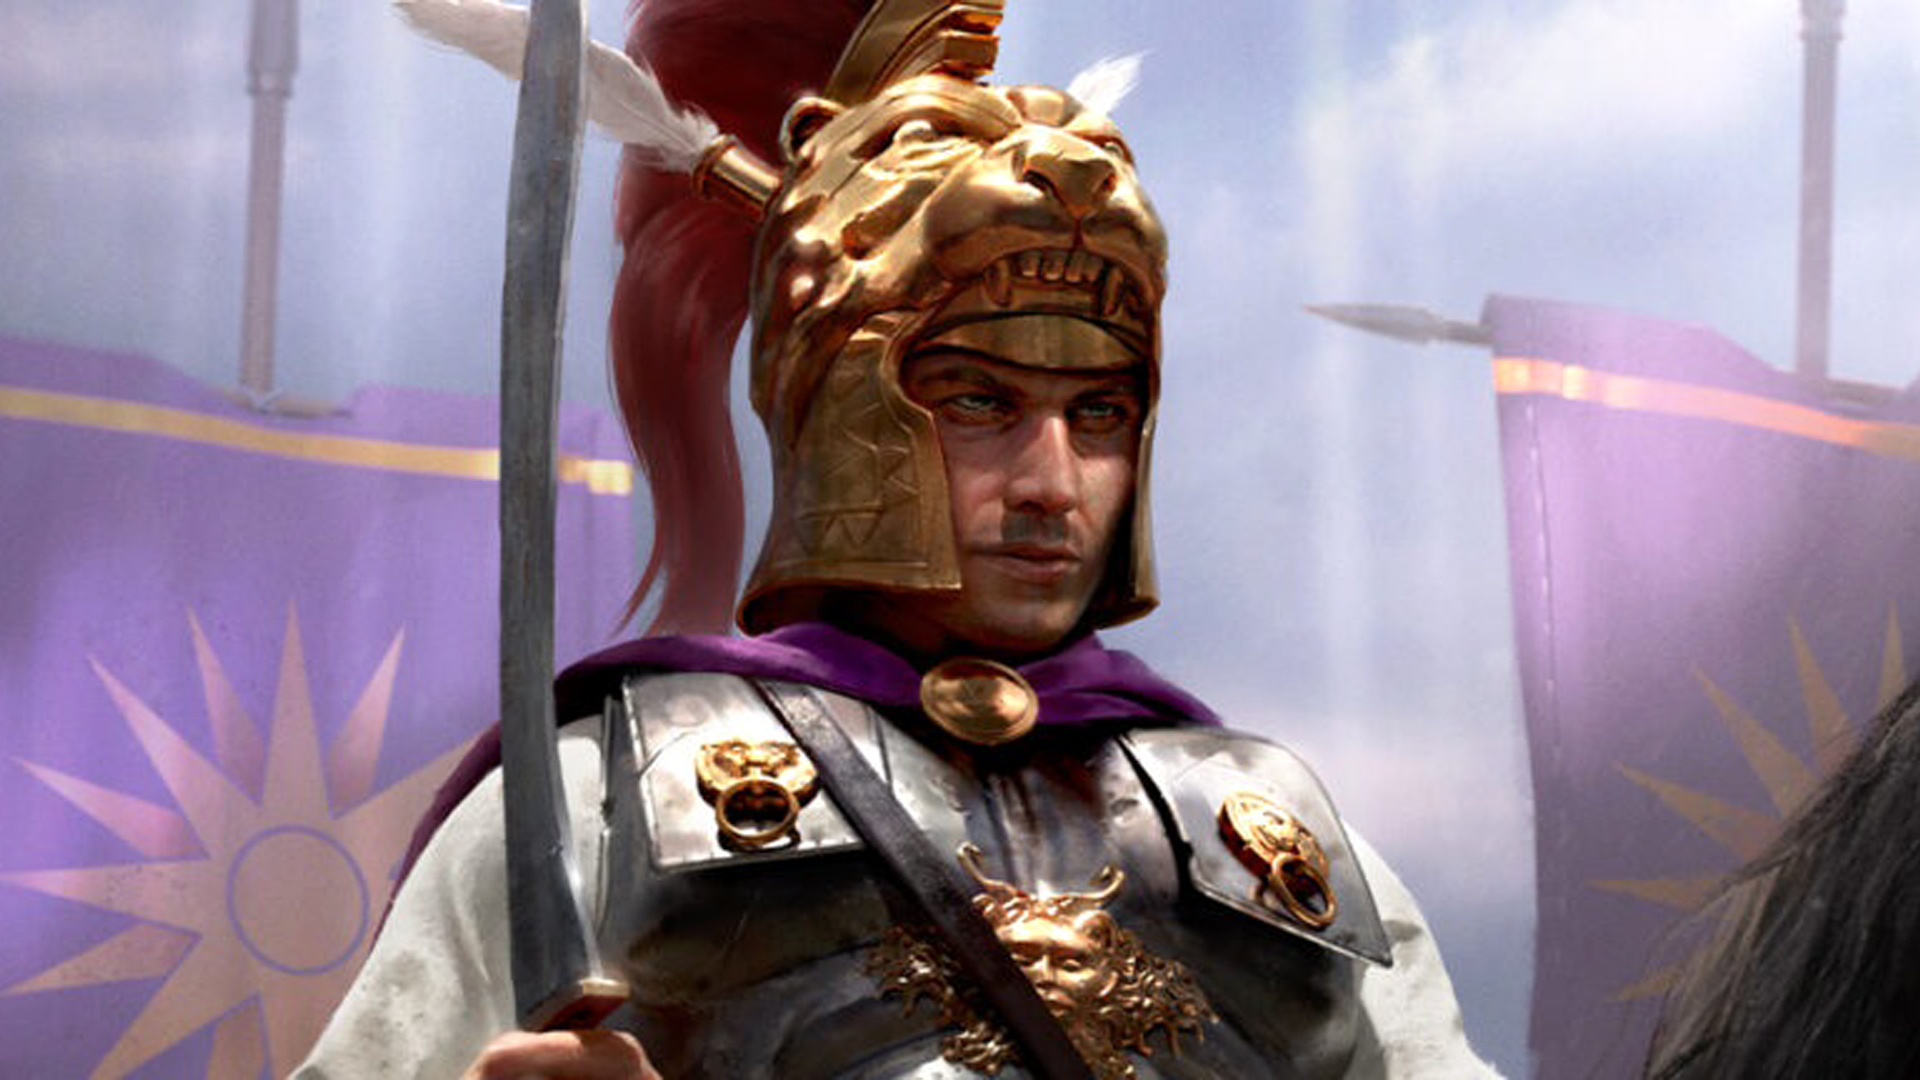 total-war-rome-remastered-s-new-patch-lifts-mod-caps-improves-functionality-pcgamesn